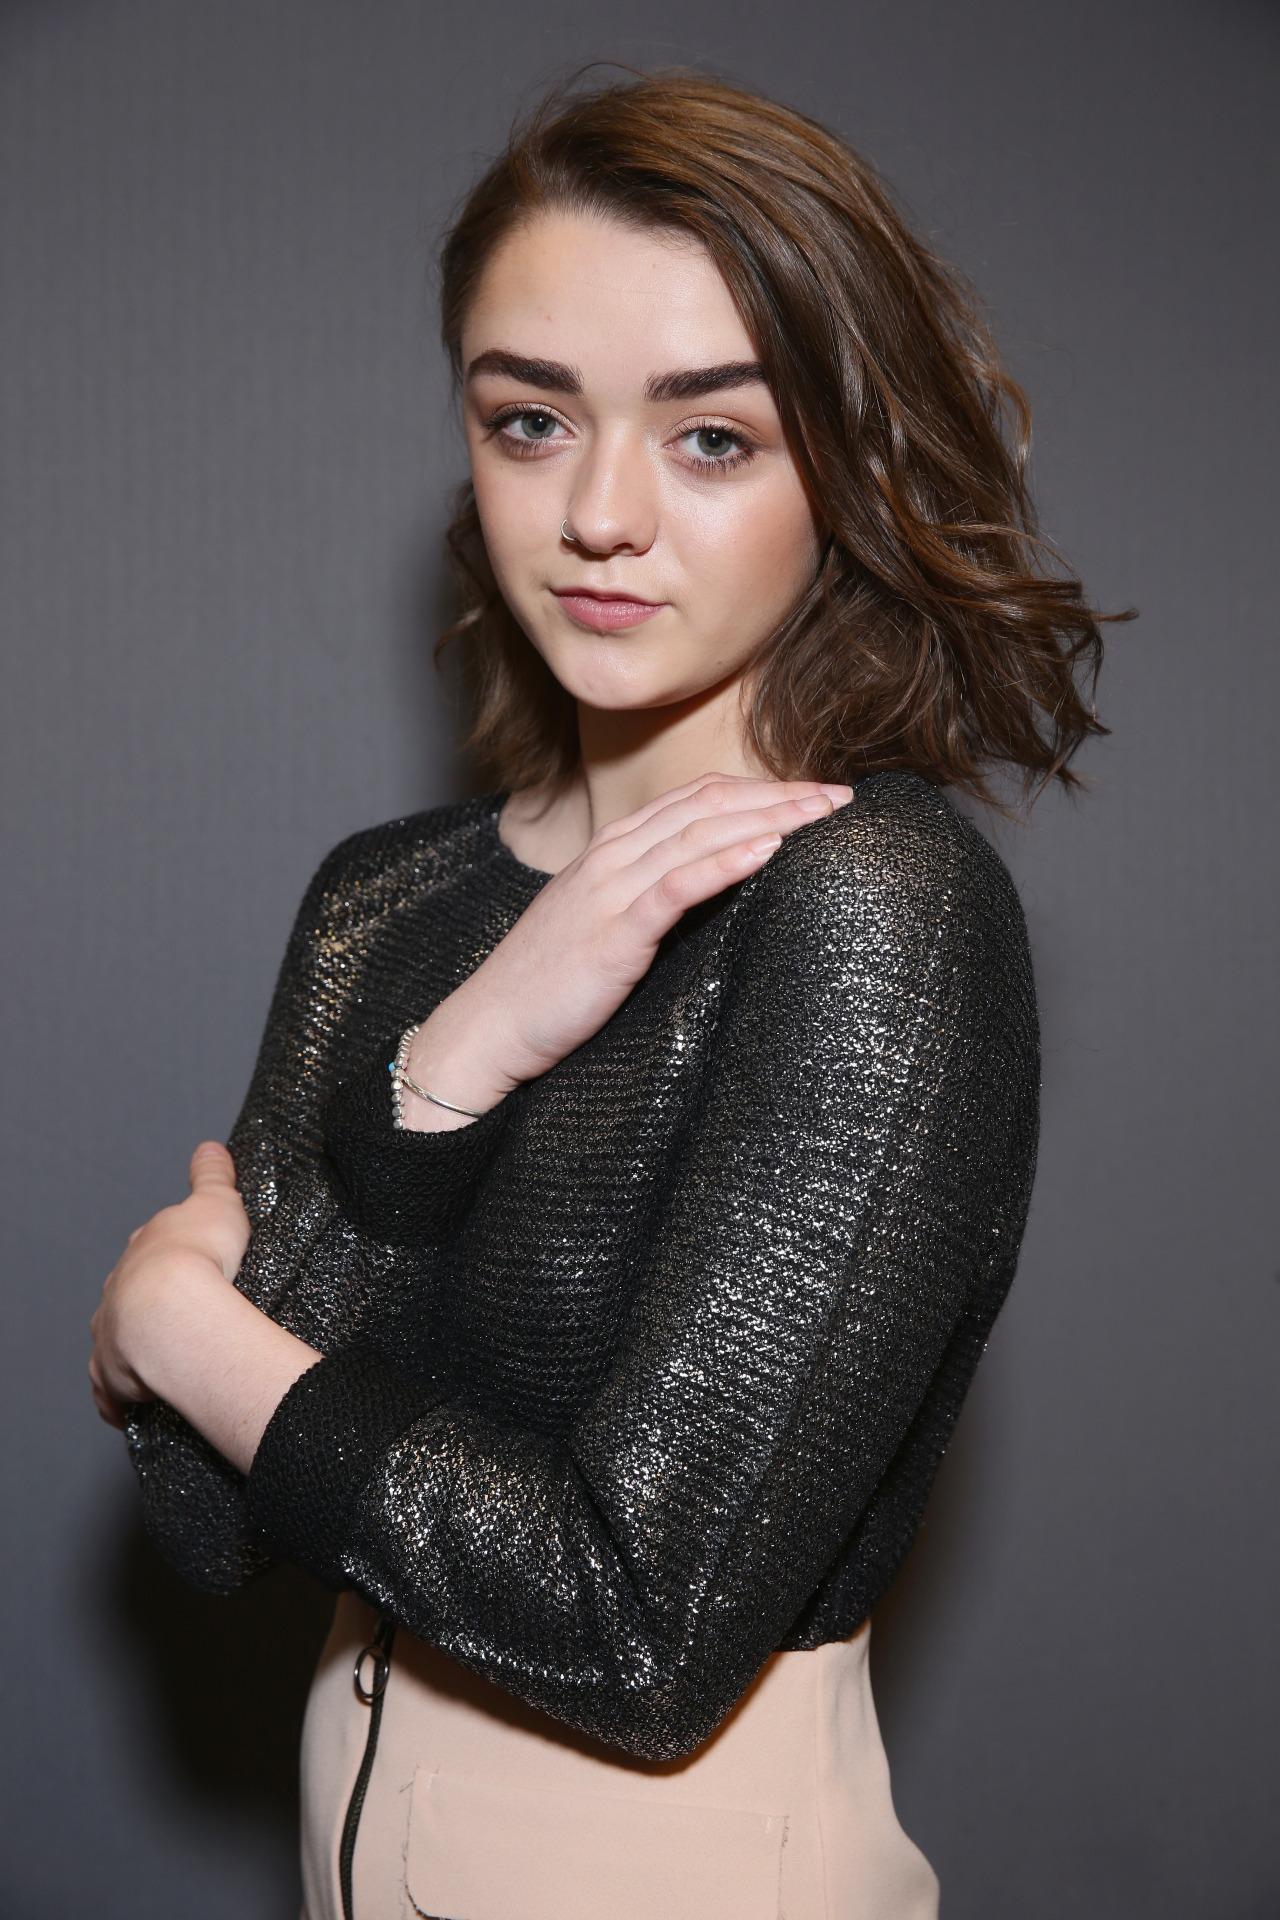 Now that she's 18 would you **** Maisie Williams (Arya Stark)?. IGN